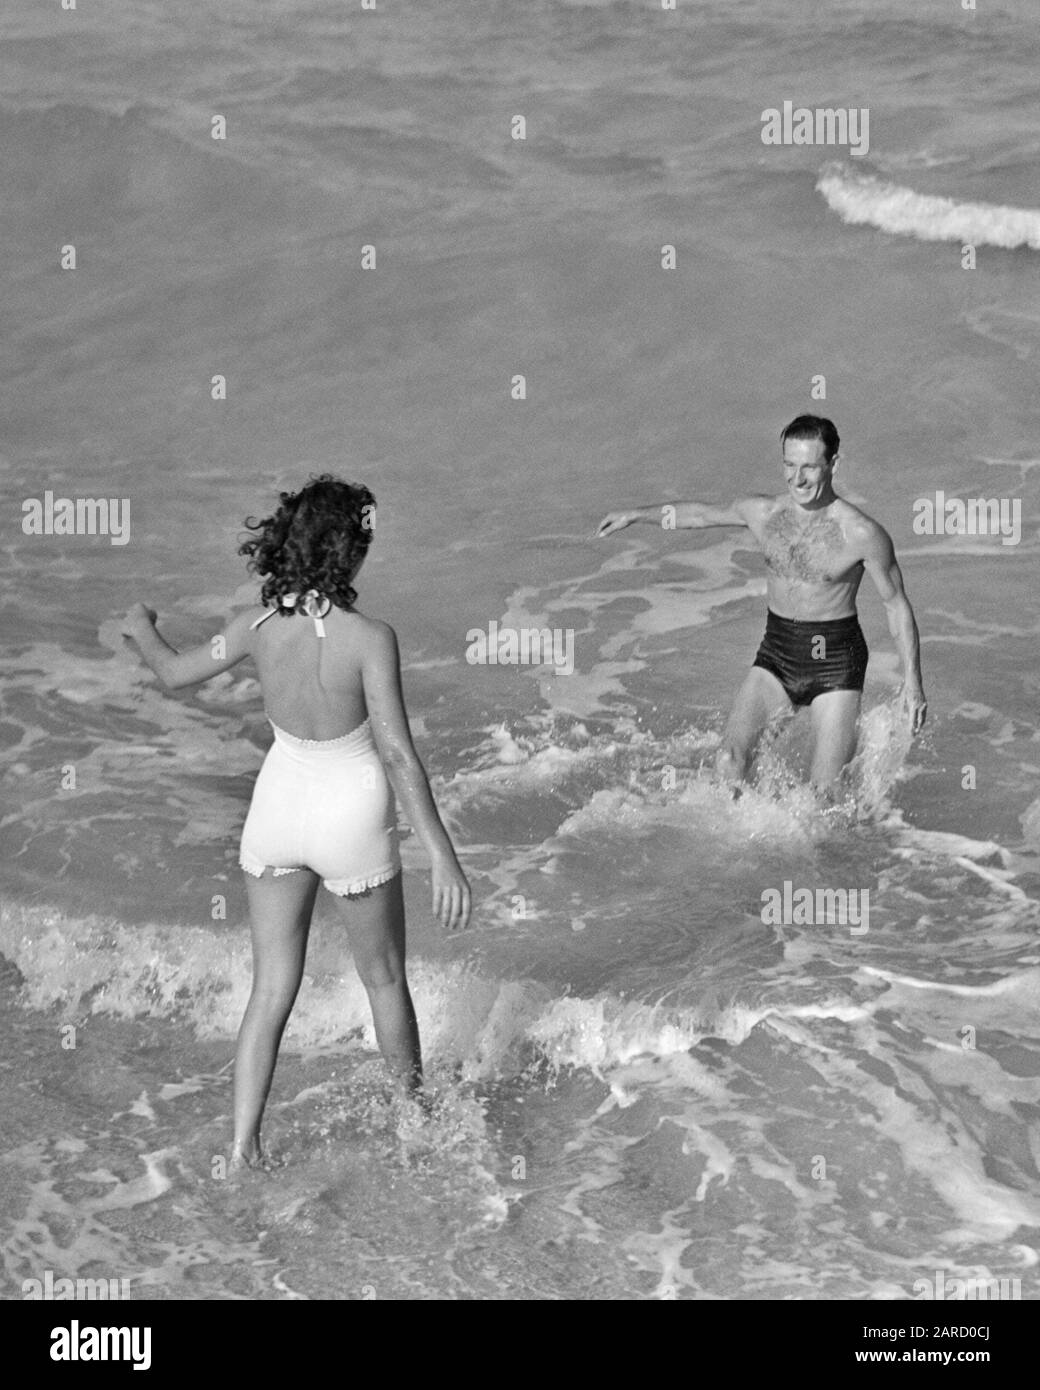 1930s 1940s VACATION COUPLE WEARING BATHING SUITS PLAYING IN SURF AT BEACH WOMAN RUNNING TOWARD SMILING MAN FLORIDA USA - b7126 HAR001 HARS 1 FITNESS SILLY TROPICAL HEALTHY COMIC VACATION STRONG JOY LIFESTYLE CELEBRATION FEMALES MARRIED SPOUSE HUSBANDS HEALTHINESS UNITED STATES FRIENDSHIP FULL-LENGTH LADIES PERSONS UNITED STATES OF AMERICA CARING MALES SURF B&W PARTNER NORTH AMERICA NORTH AMERICAN ACTIVITY HUMOROUS HAPPINESS PHYSICAL LEISURE STRENGTH EXCITEMENT RECREATION TOWARD COMICAL AT IN ATTRACTION CONNECTION CONCEPTUAL COMEDY FLEXIBILITY MUSCLES BATHING SUITS PERSONAL ATTACHMENT Stock Photo